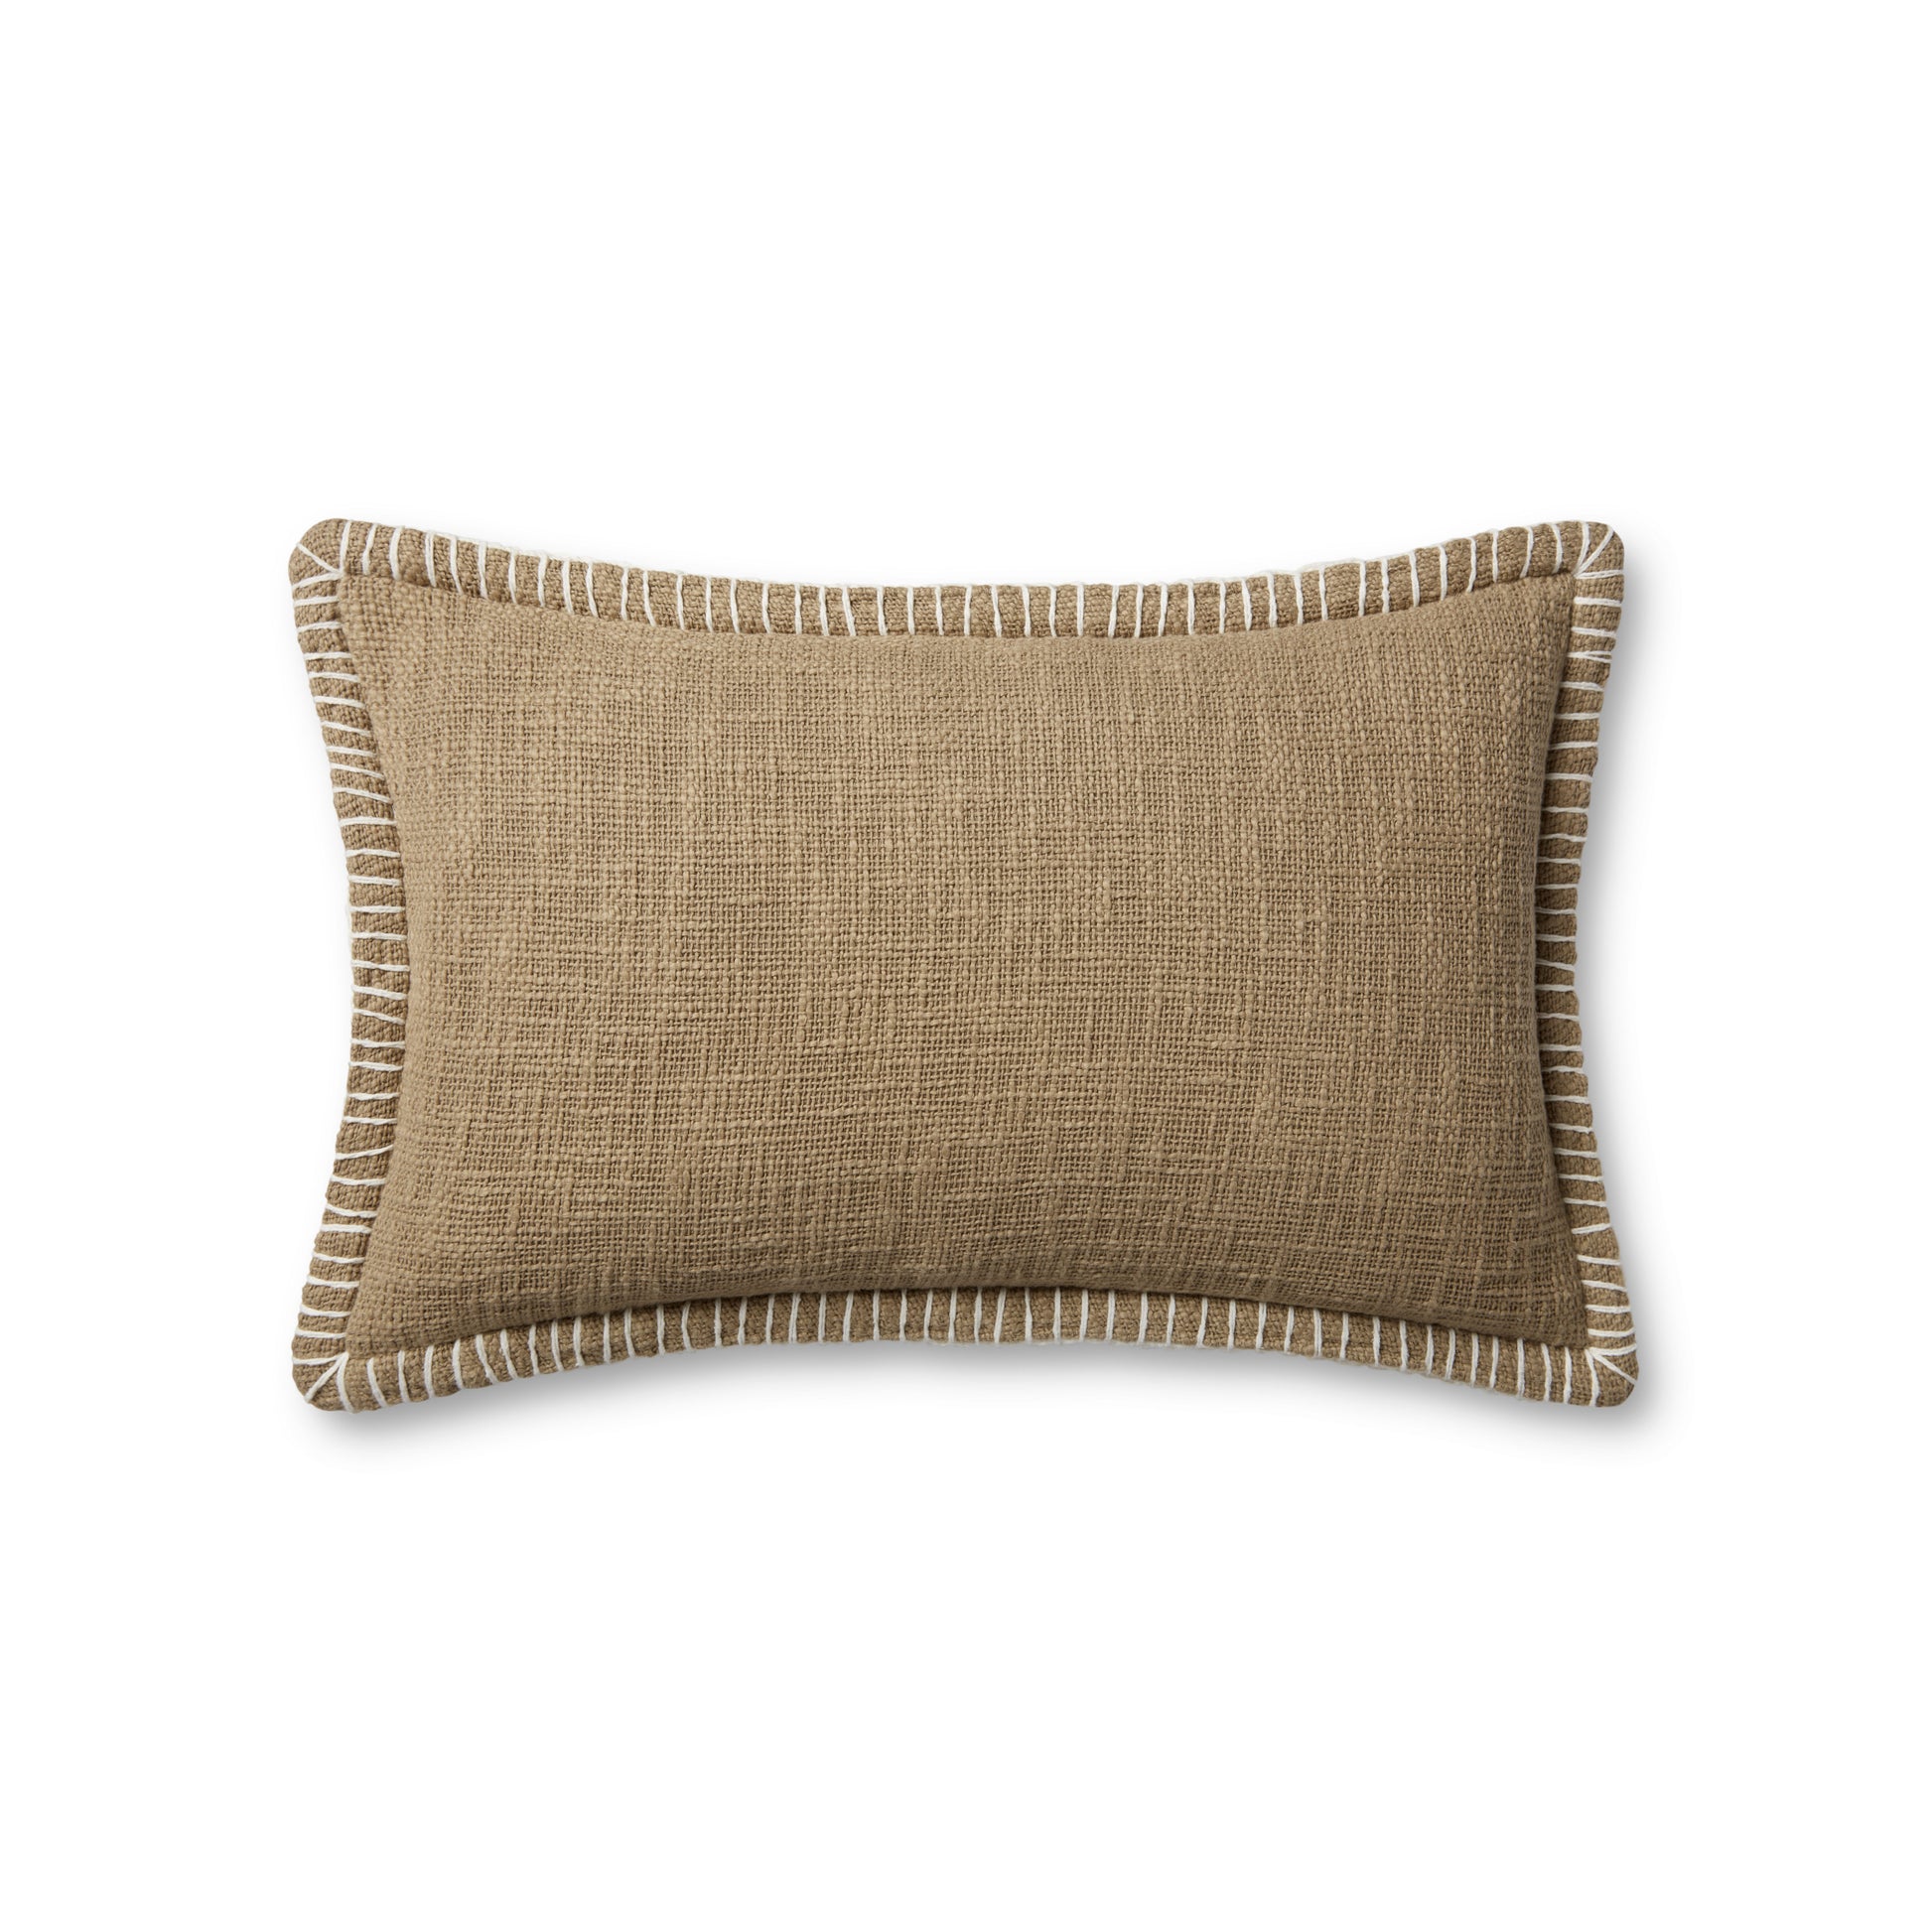 Photo of a pillow;  PLL0109 Taupe 13'' x 21'' Cover w/Poly Pillow